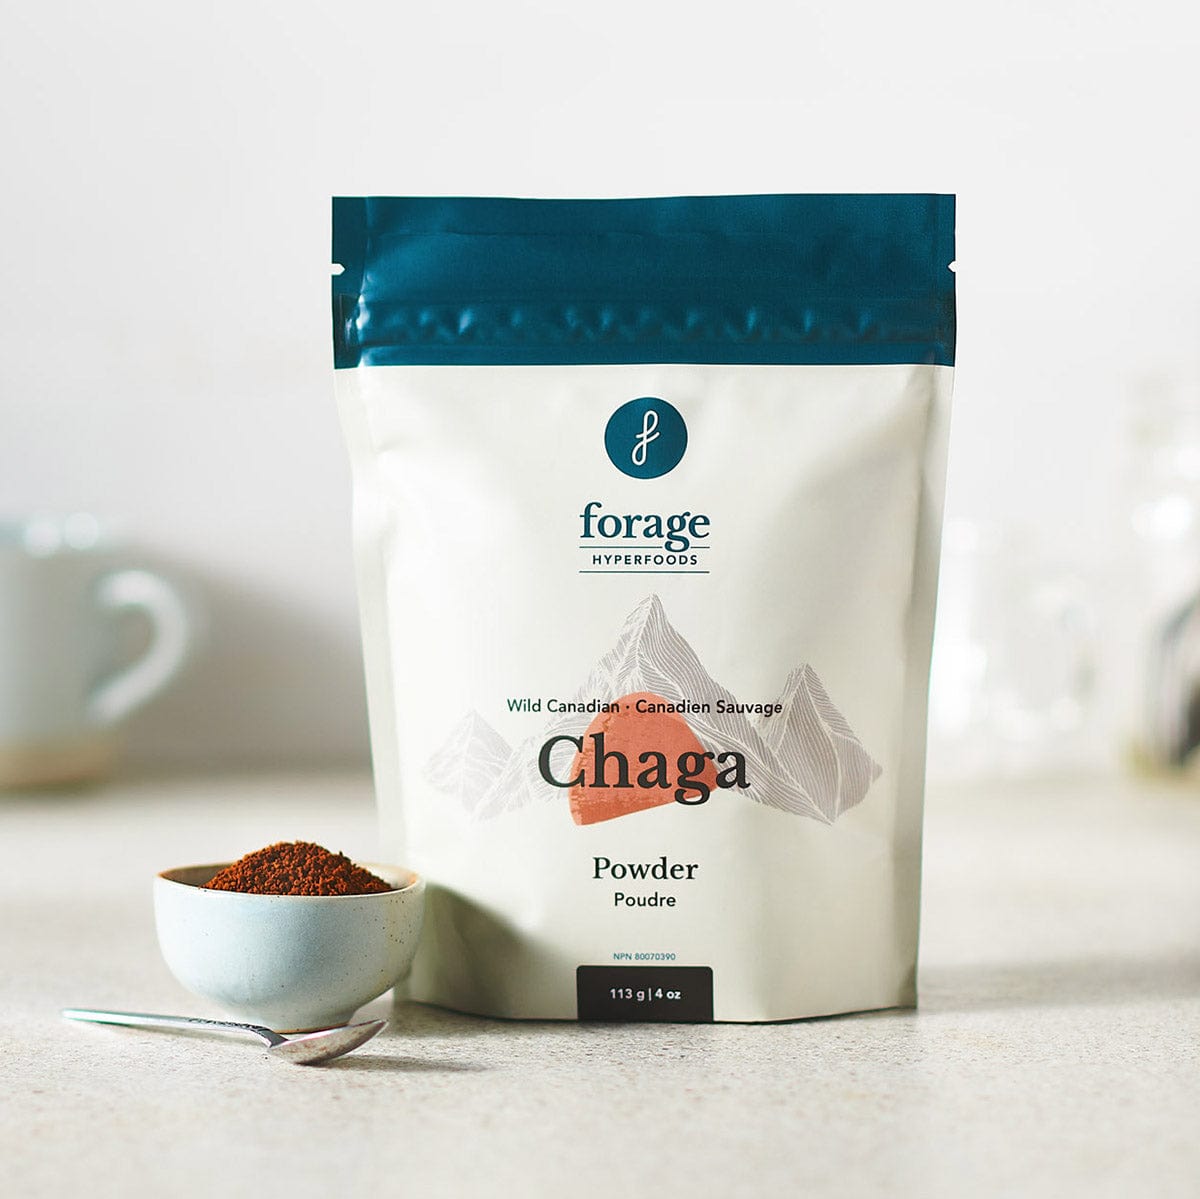 A bag of Canadian Chaga Powder by Forage Hyperfoods with a bowl of Powdered Chaga mushroom next to it.